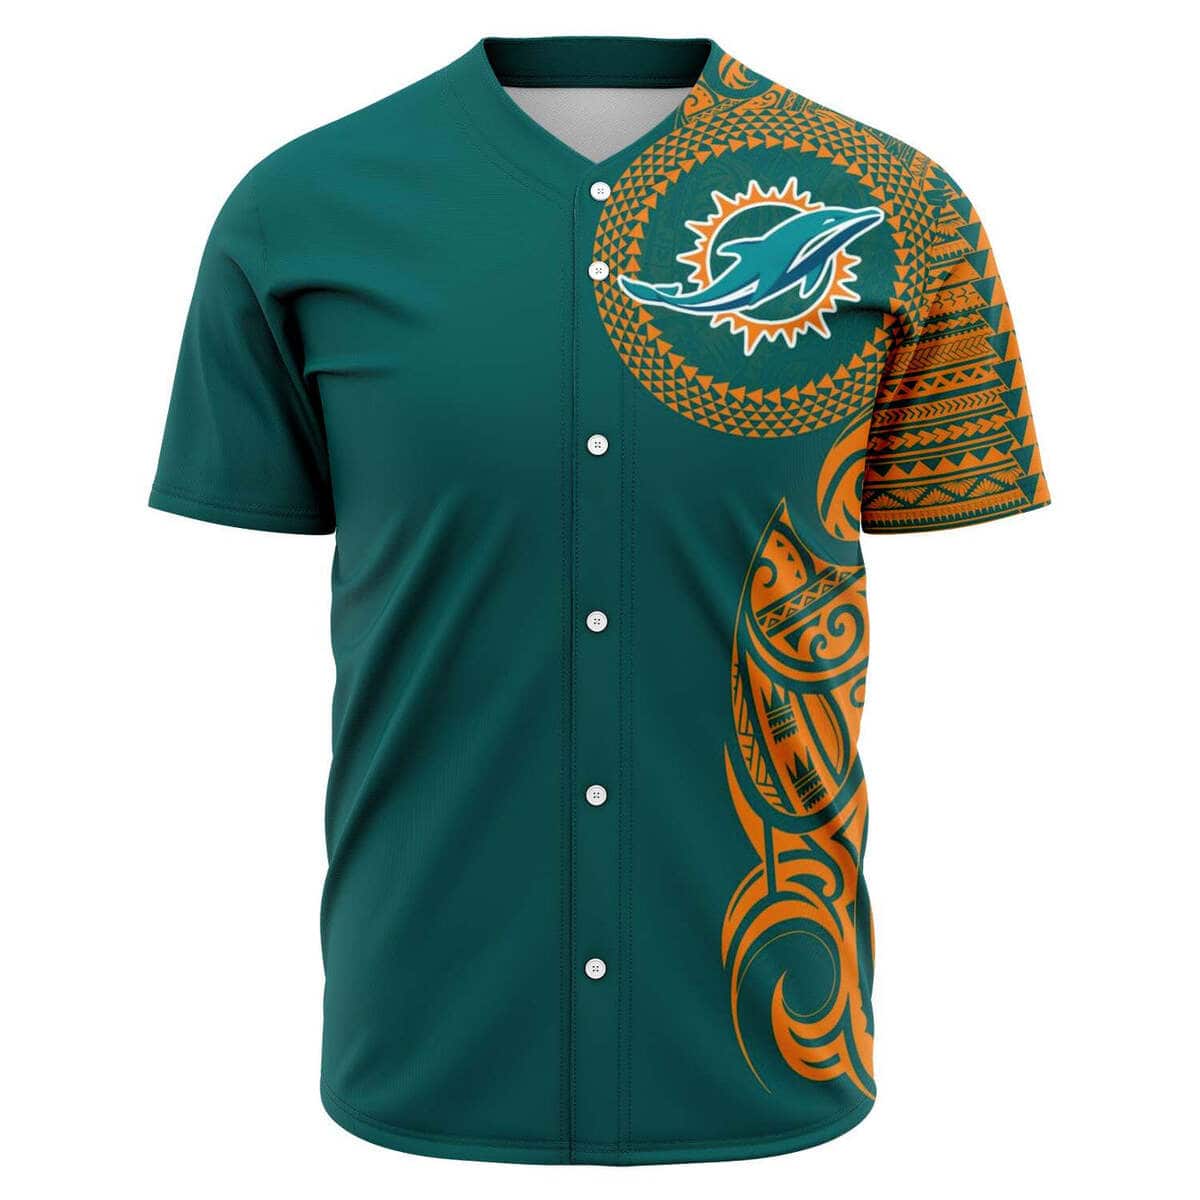 Polynesian NFL Miami Dolphins Baseball Jersey Gift For Football Lovers